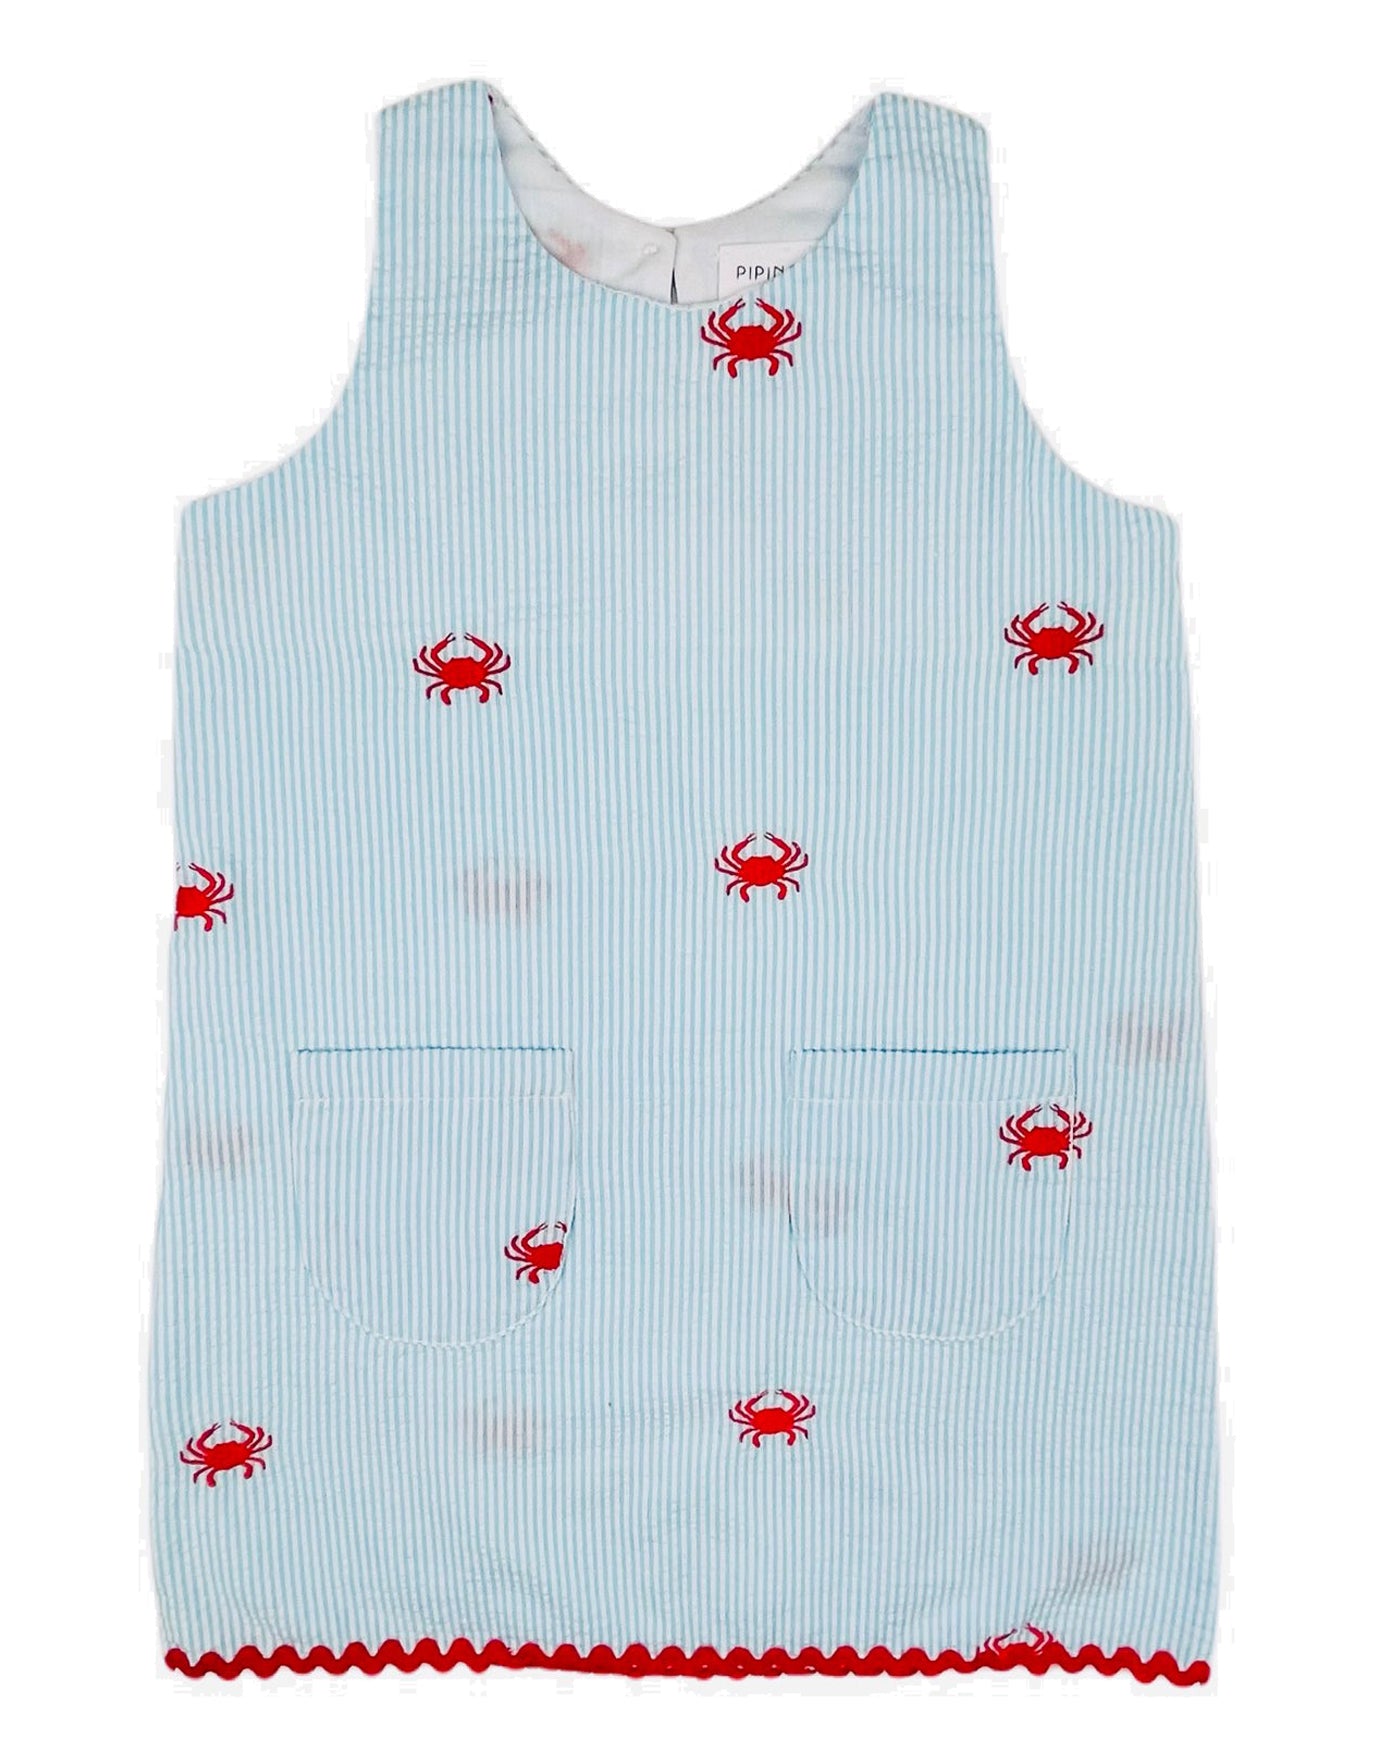 Turquoise Seersucker Girls Dress with Red Embroidered Crabs